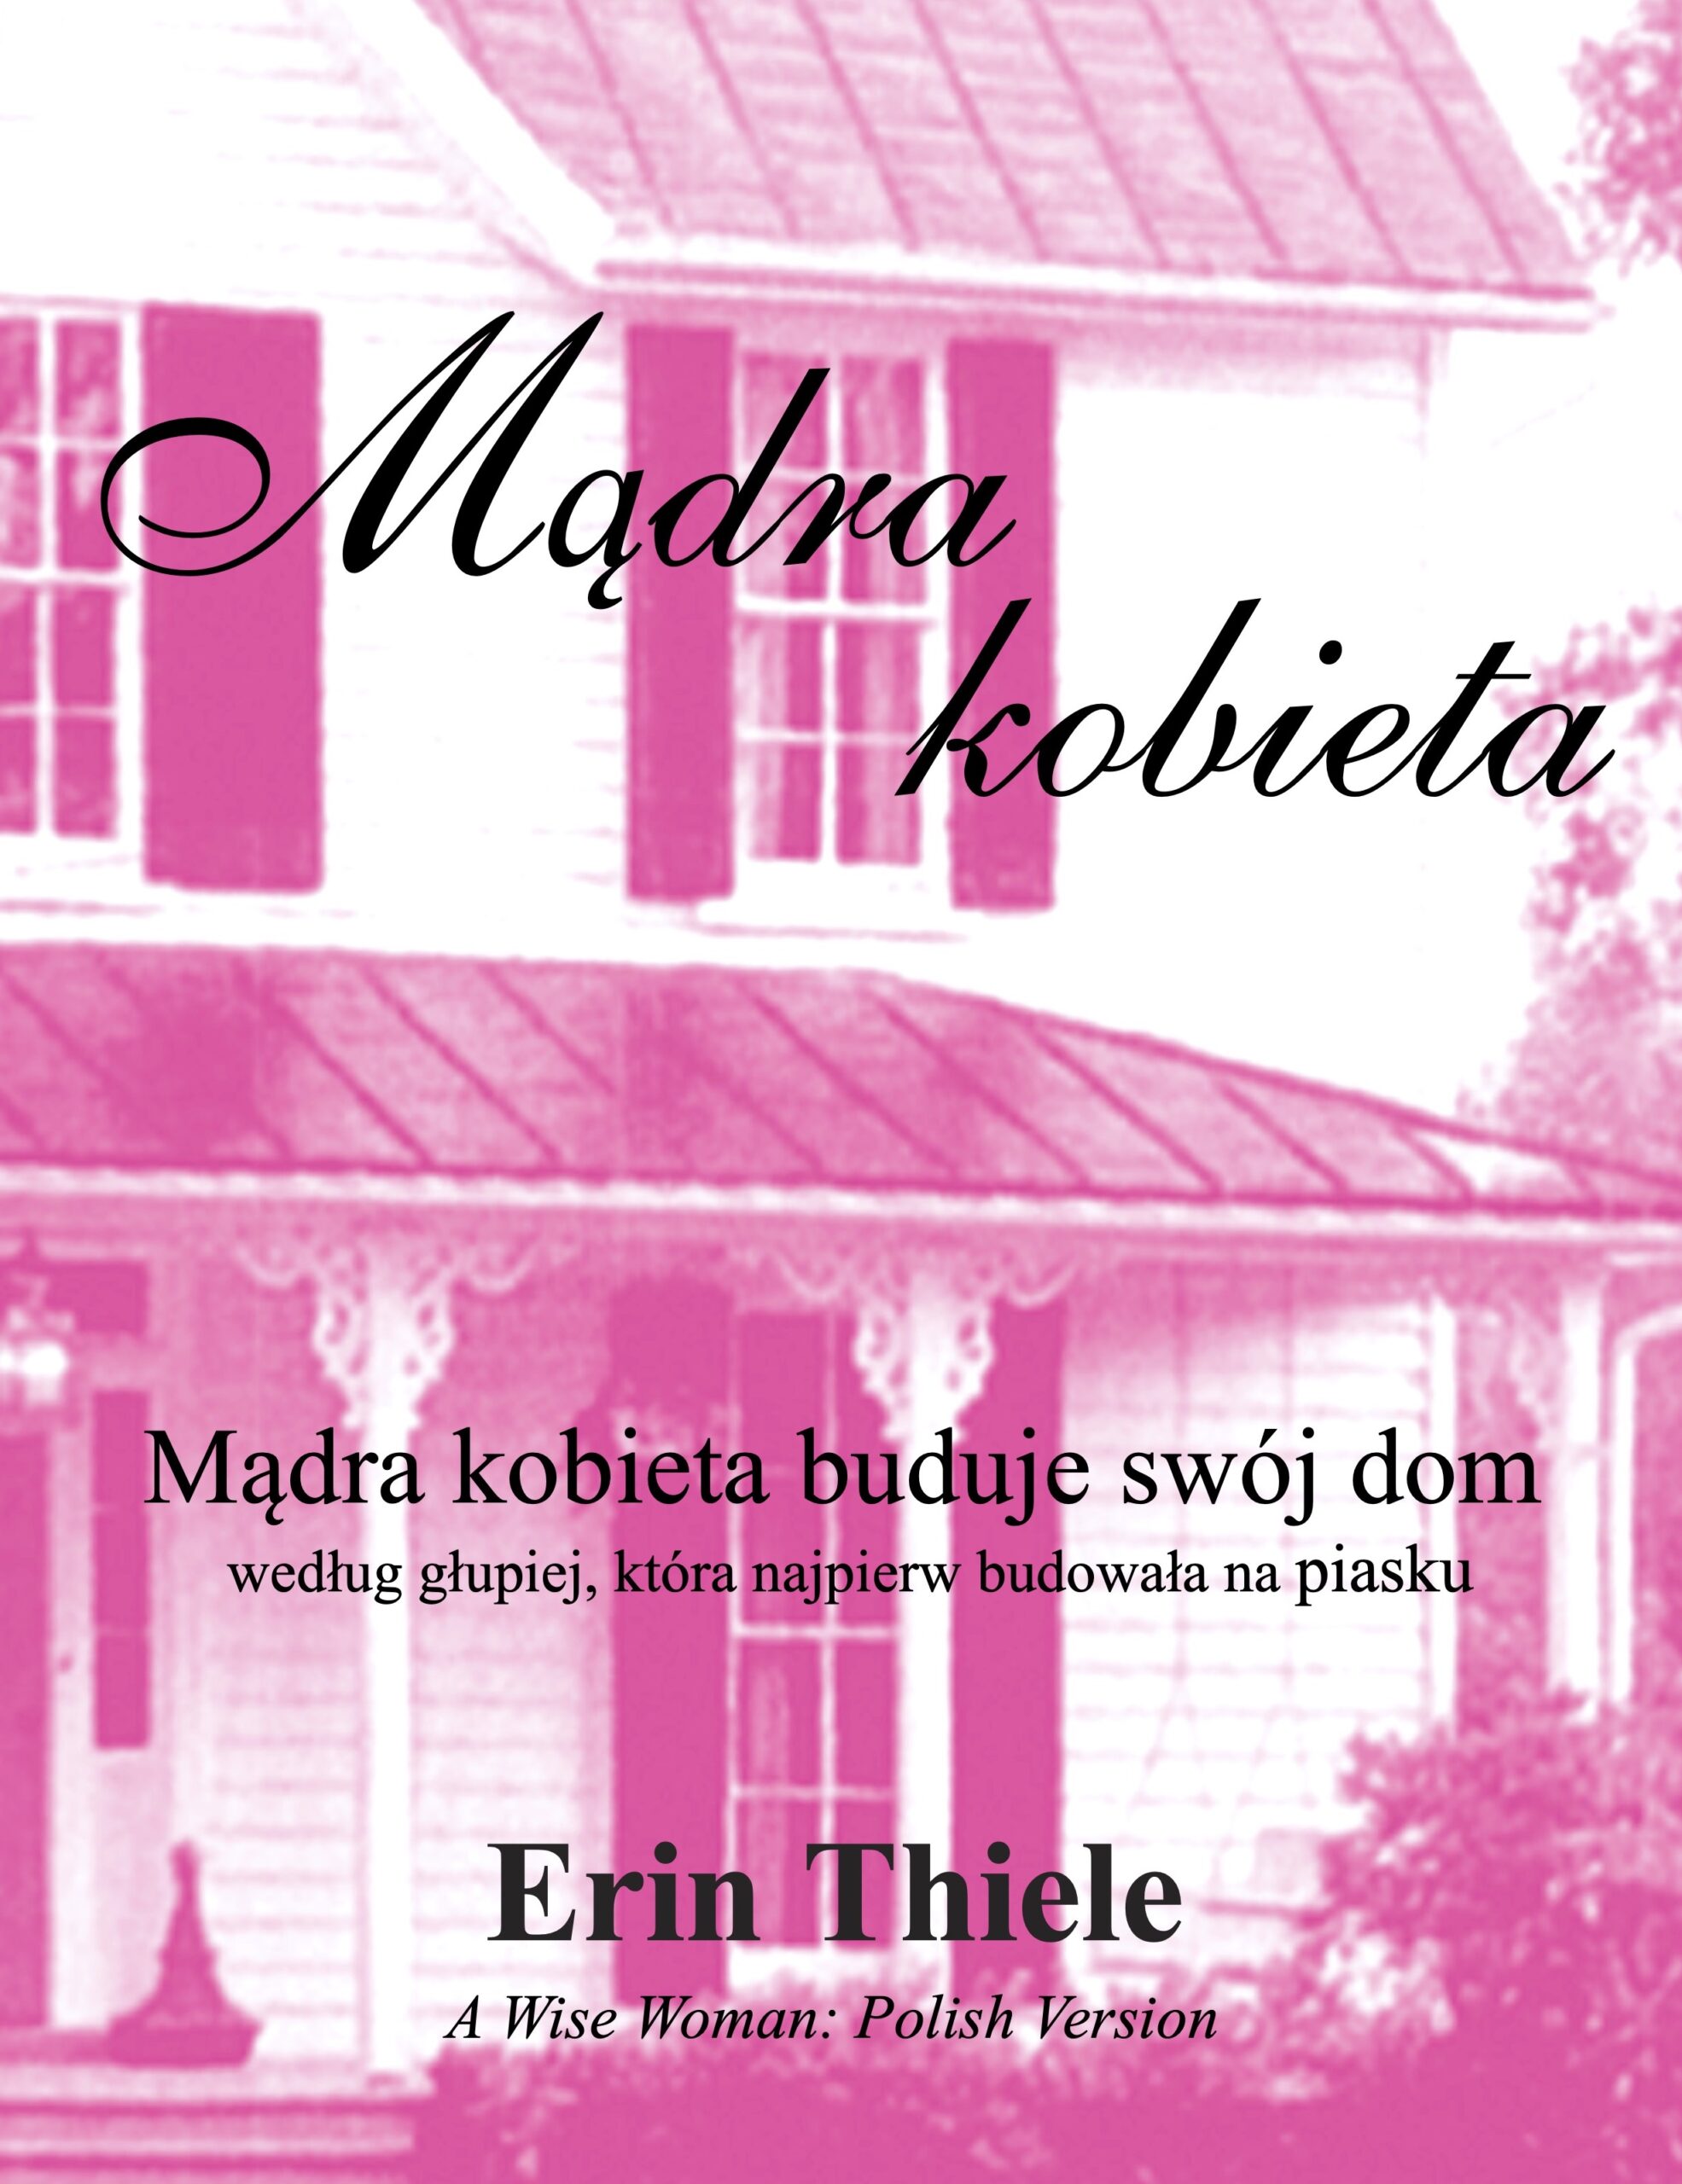 NEW WW Polish COVER Front